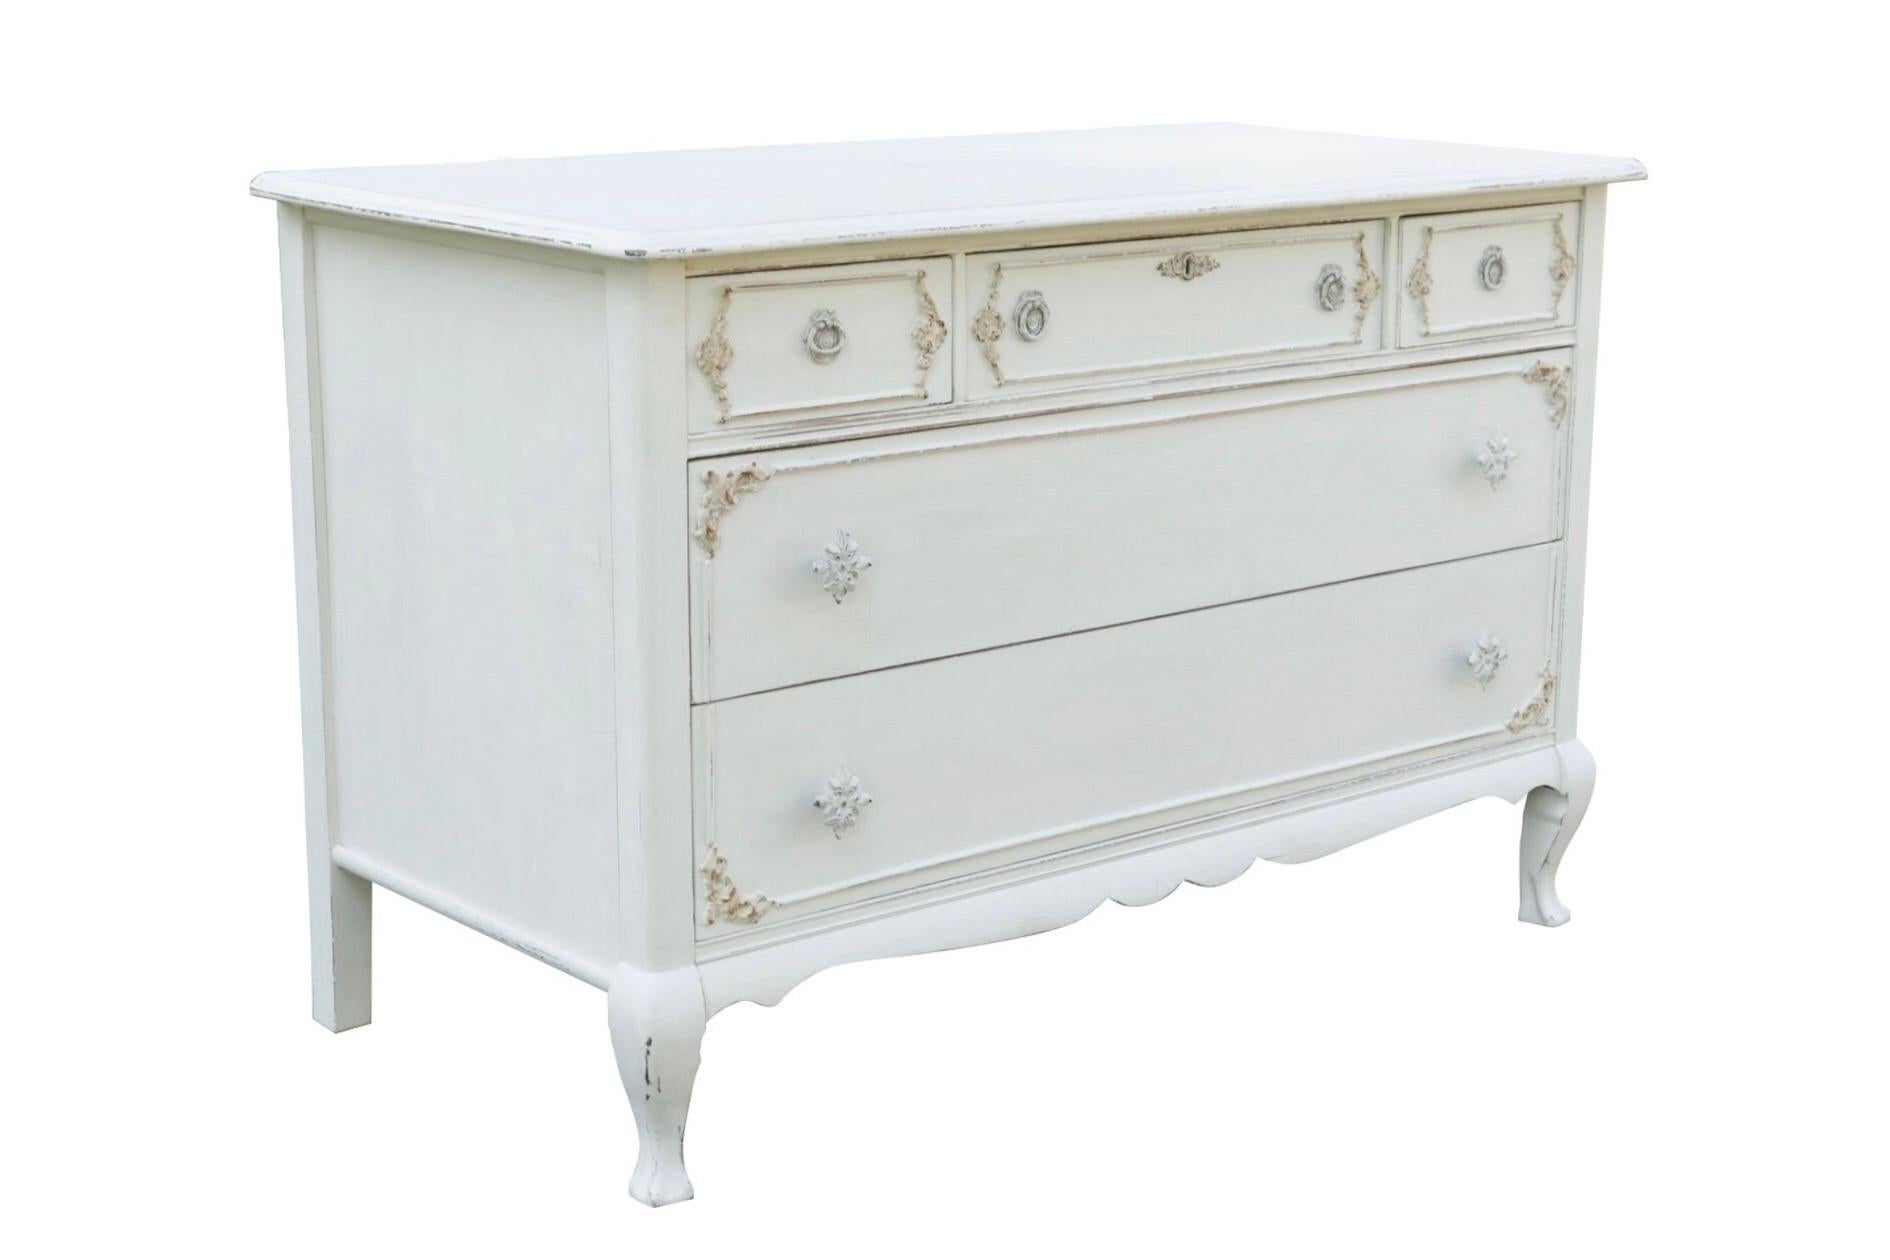 A Gustavian painted Queen Anne dresser. Three over two drawers are dovetailed, opening with pressed pull handles above and floral knob handles below. Drawer fronts are decorated with beveled and carved paneling. A simple serpentine skirt meets